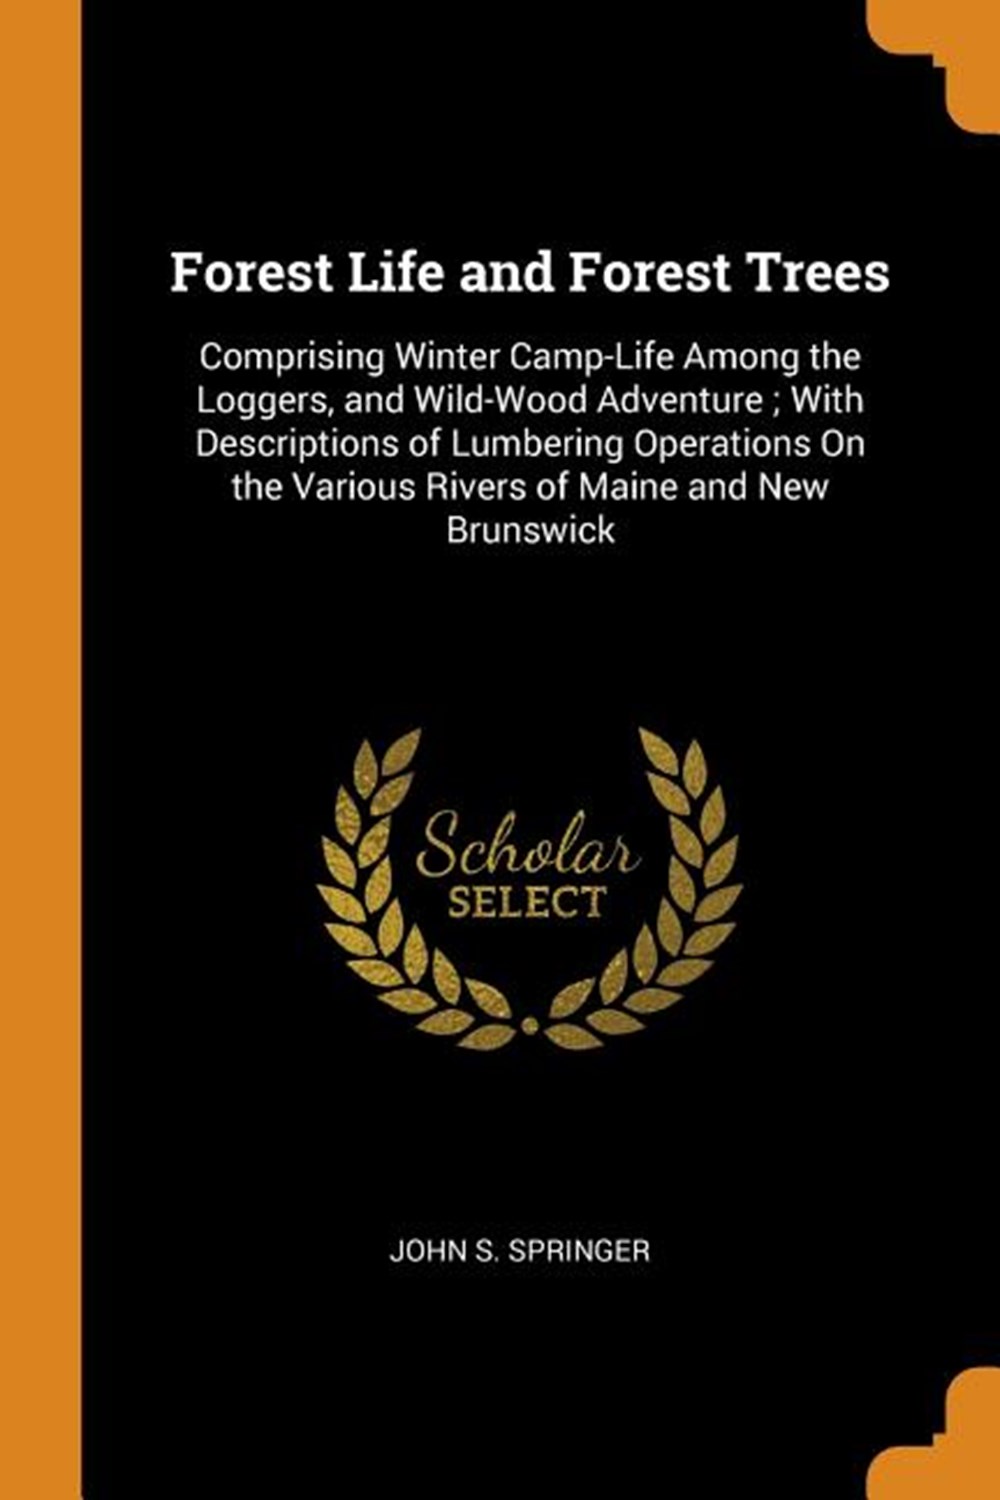 Forest Life and Forest Trees: Comprising Winter Camp-Life Among the Loggers, and Wild-Wood Adventure